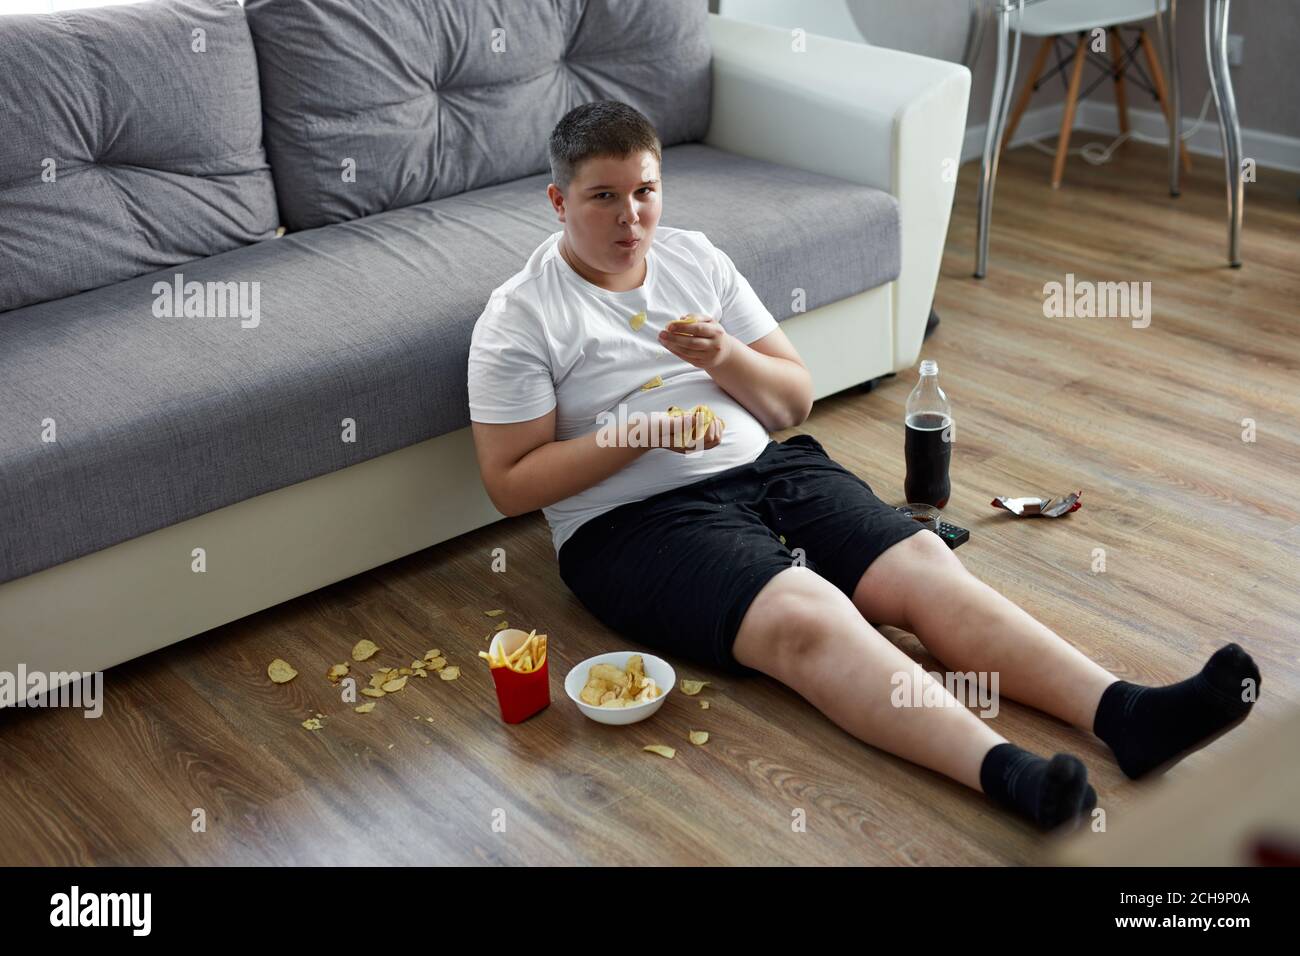 overweight fat boy eat junk food while watching tv alone at home, sit on the floor with french fries, carbonated drink, chips. enjoy unhealthy lifesty Stock Photo